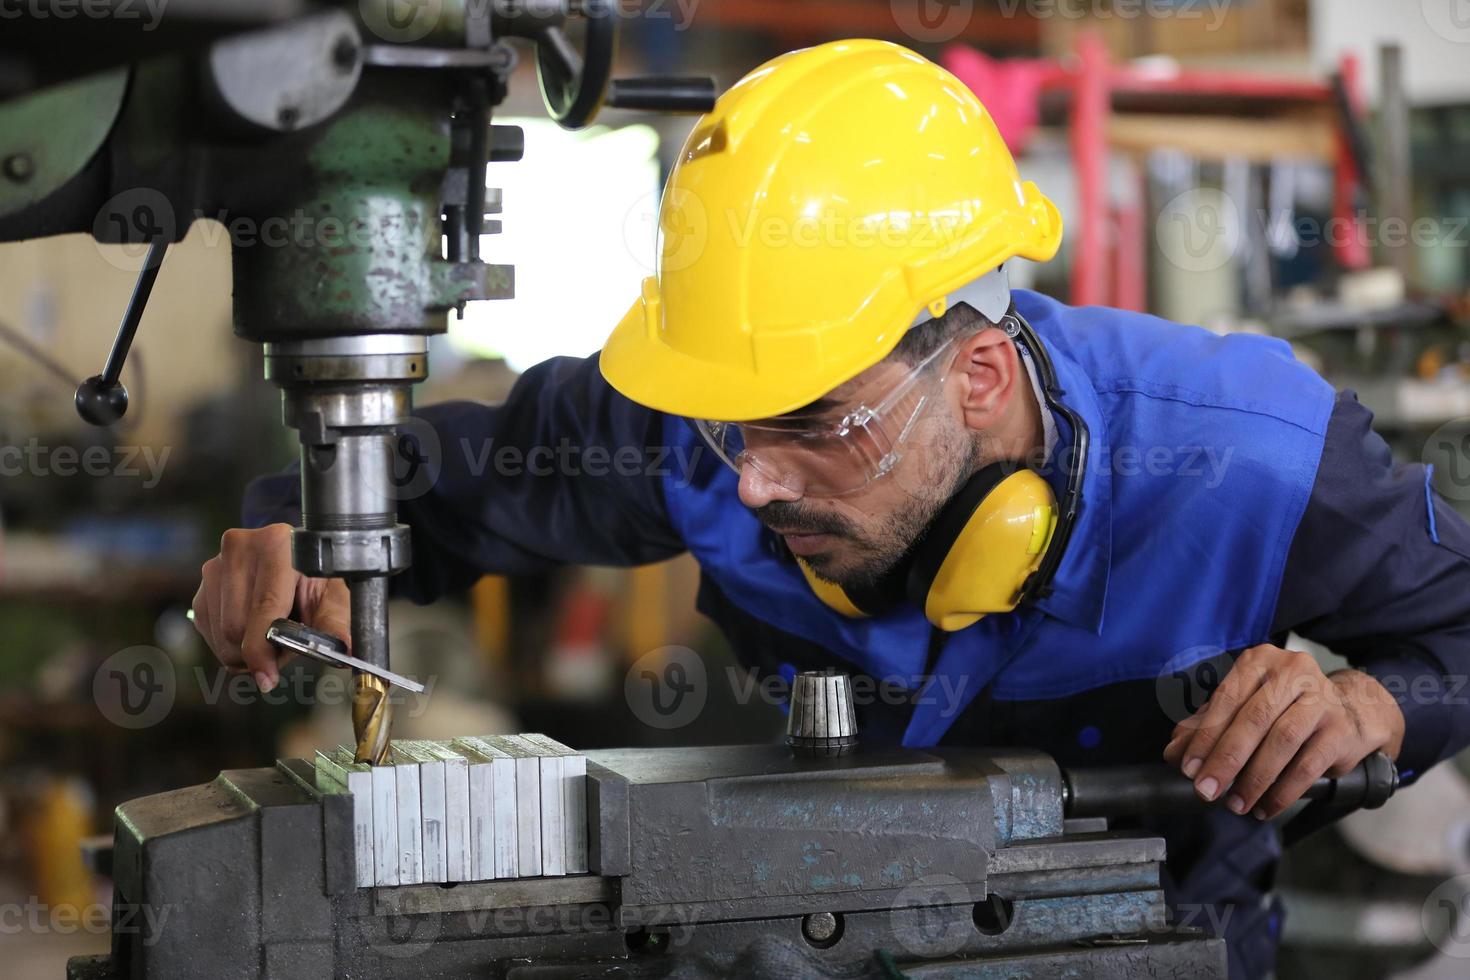 Professional industrial factory employee working with machine part, checking and testing industrial equipment and robot arms in large Electric electronics wire and cable manufacturing plant factory photo